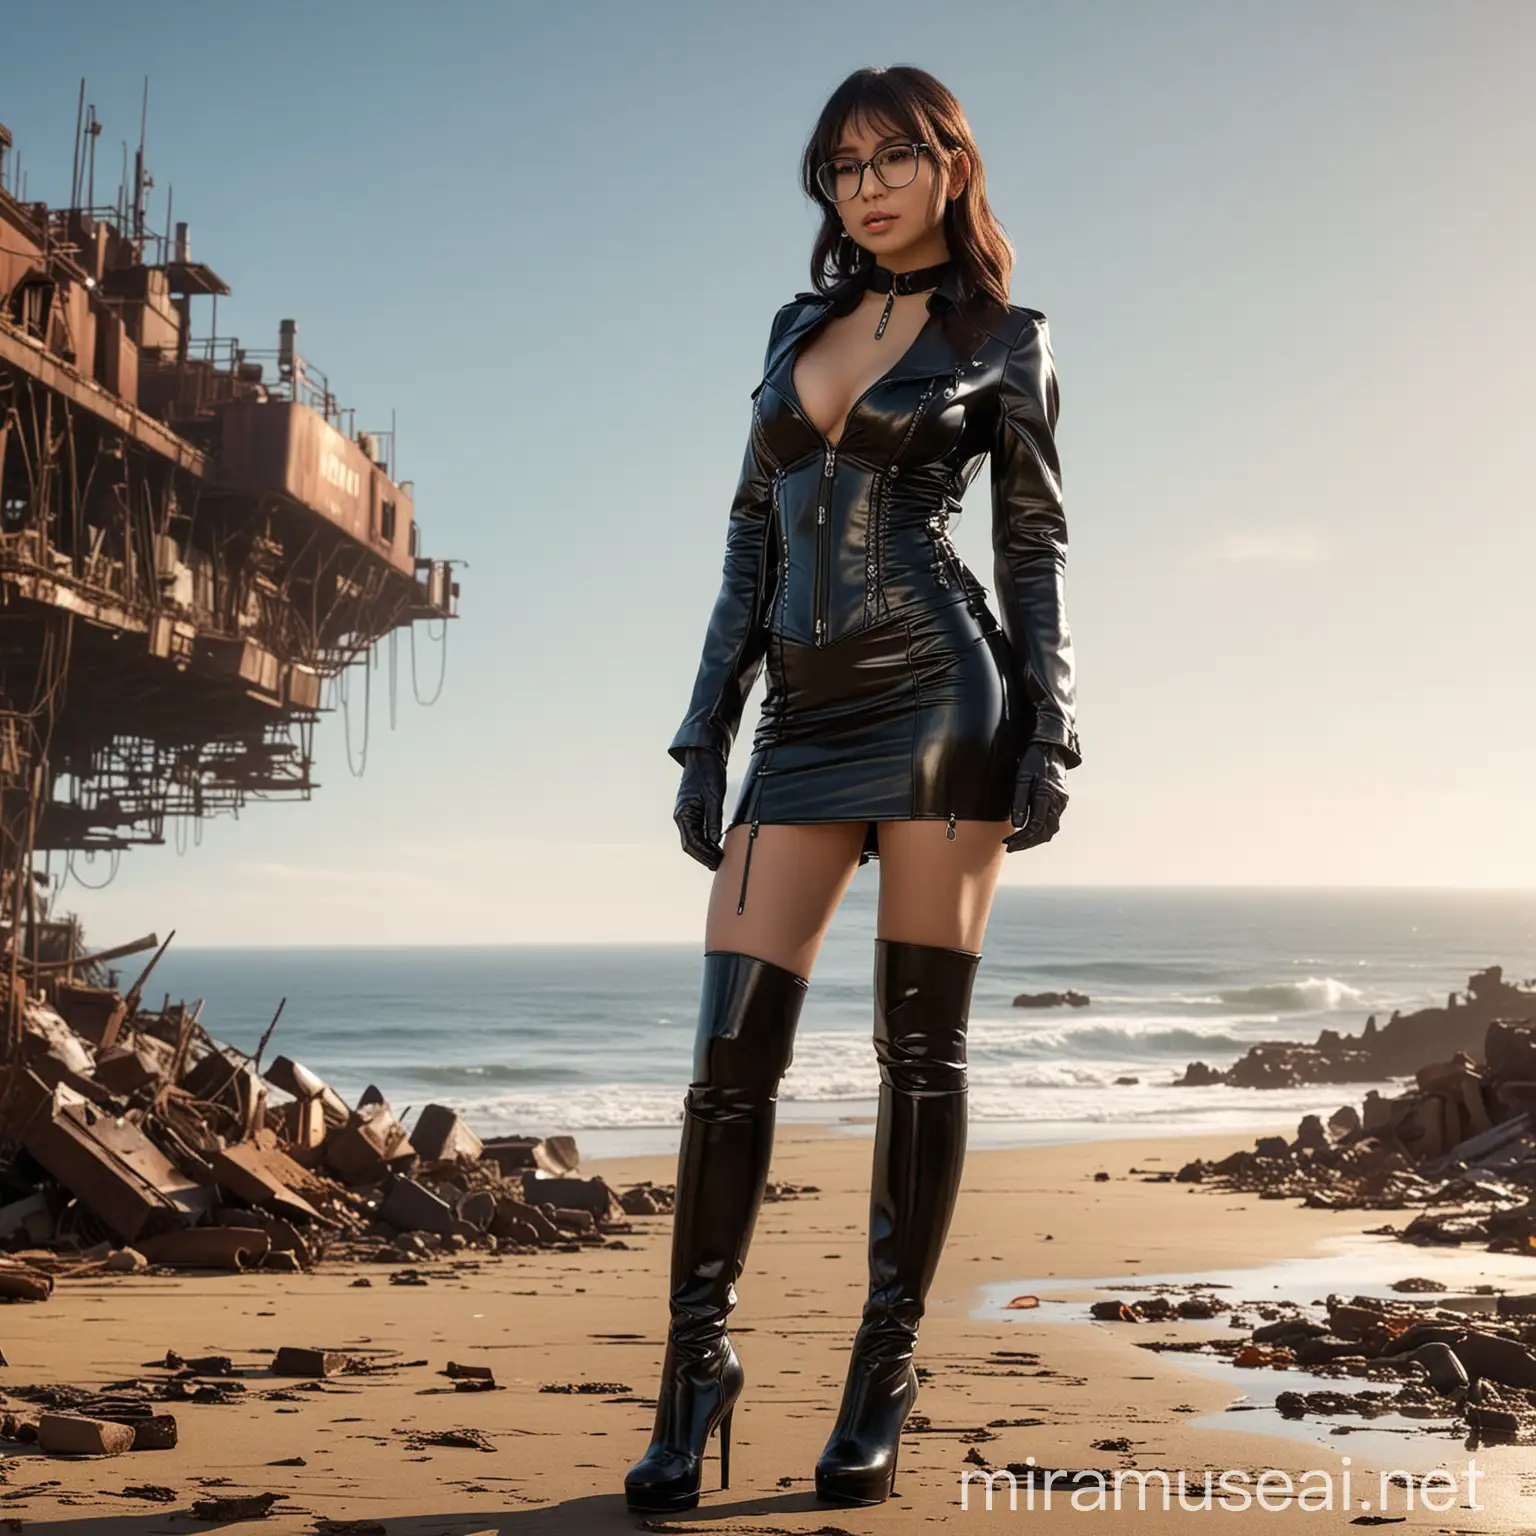 Latex Steampunk Fallout Transformation Mia Khalifas Daughter and Hitomi Tanakas Influence